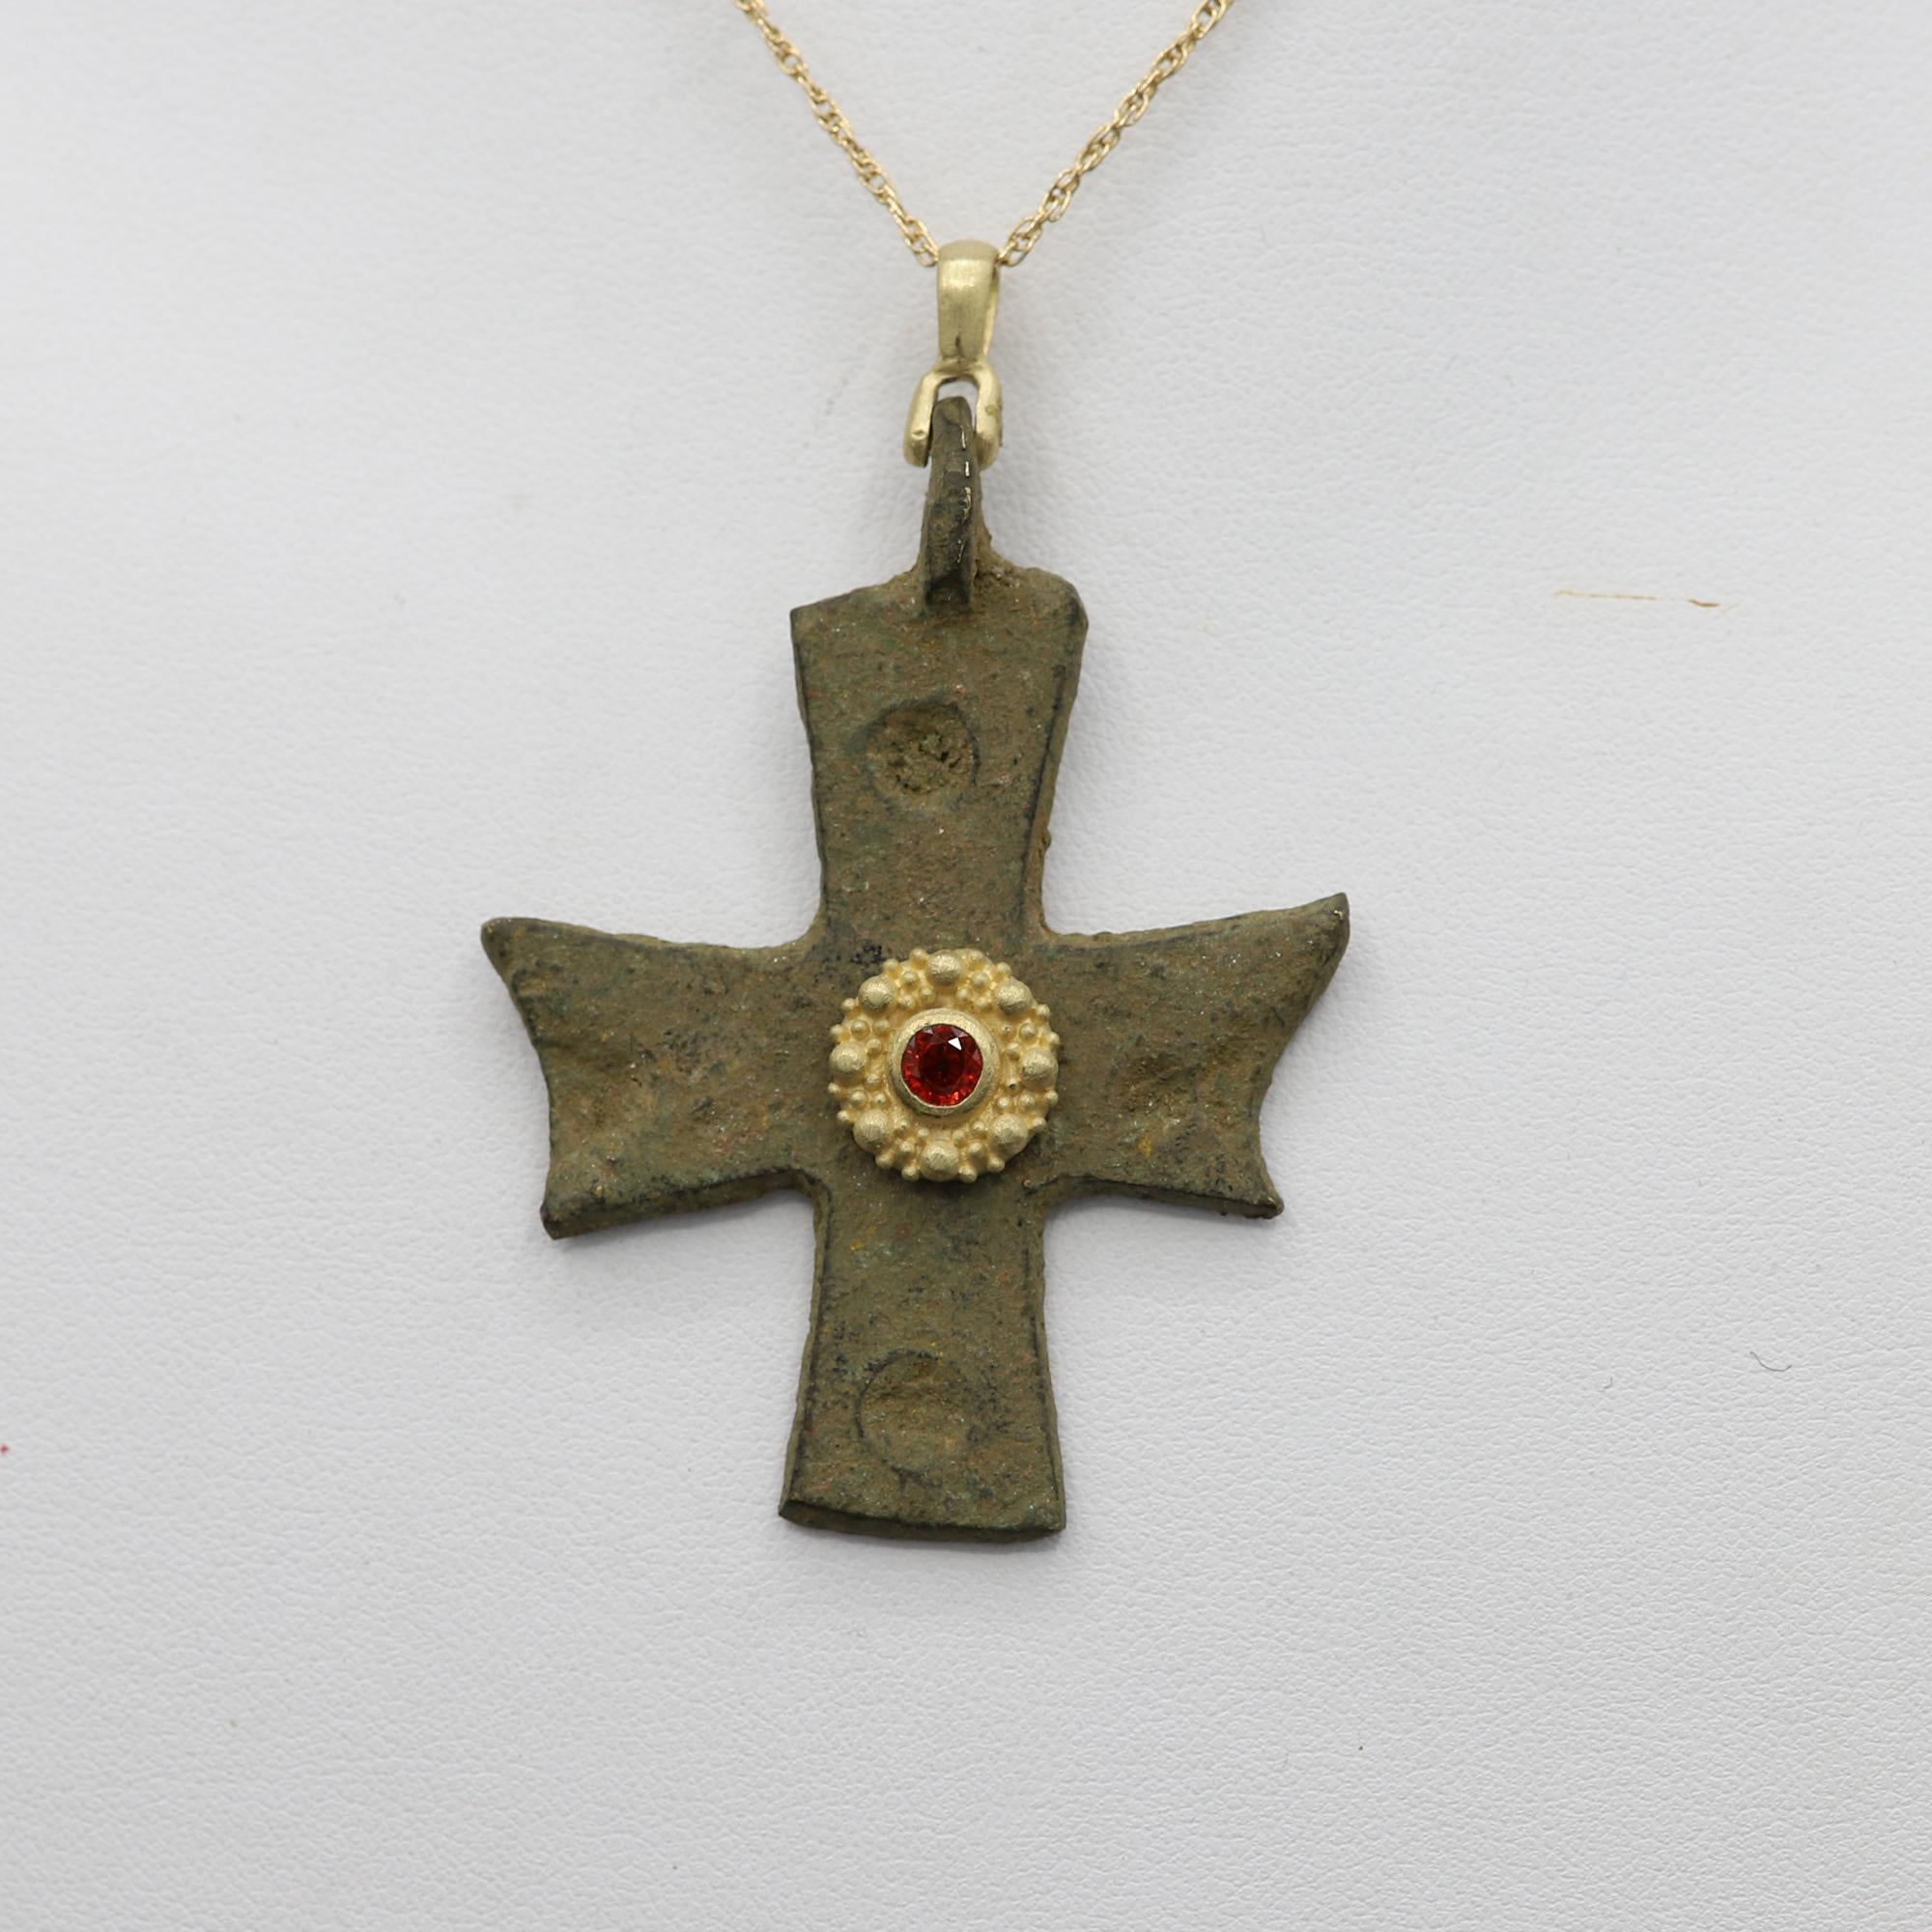 Magnificent piece of History - can be yours today !
Ancient Byzantine Period cross.
Hand set in Italy with 18k Yellow Gold & Red Sapphire.
Approx size 2' inch / 50 mm.
This Antique Bronze Cross is estimated from 600-900 AD 
Included 16' Inch  Gold